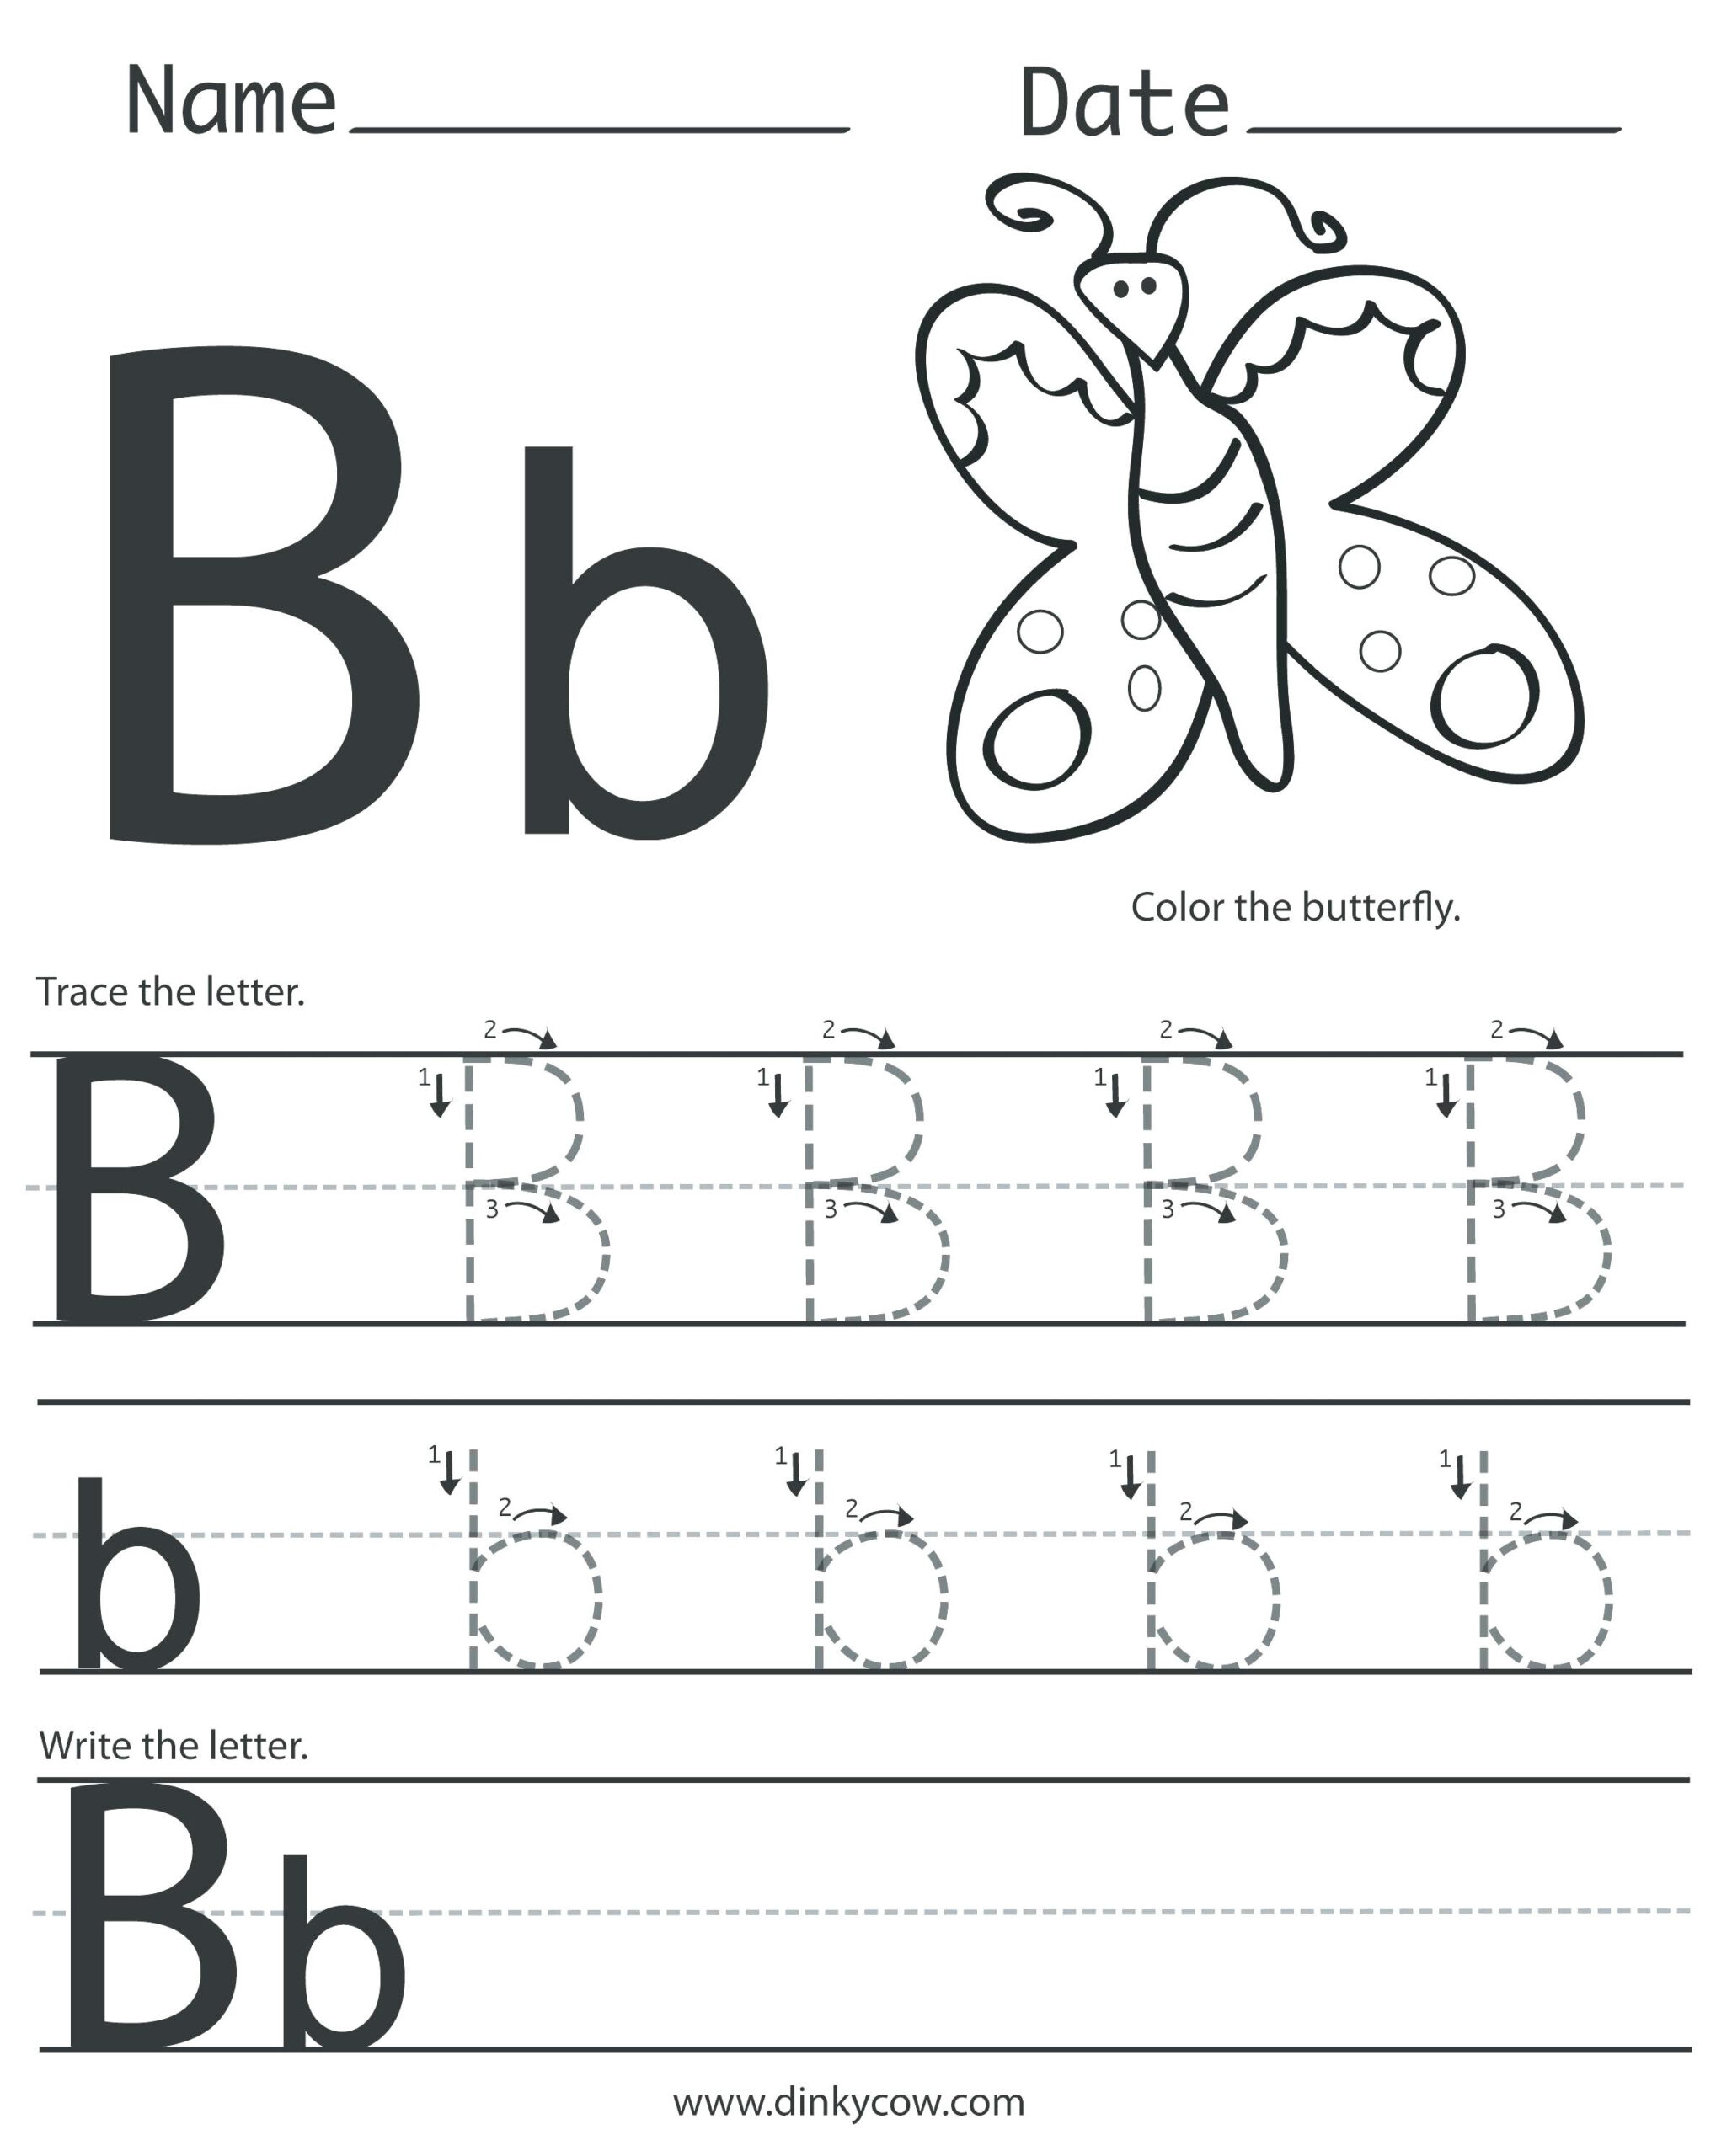 free-abc-worksheets-for-kids-101-printable